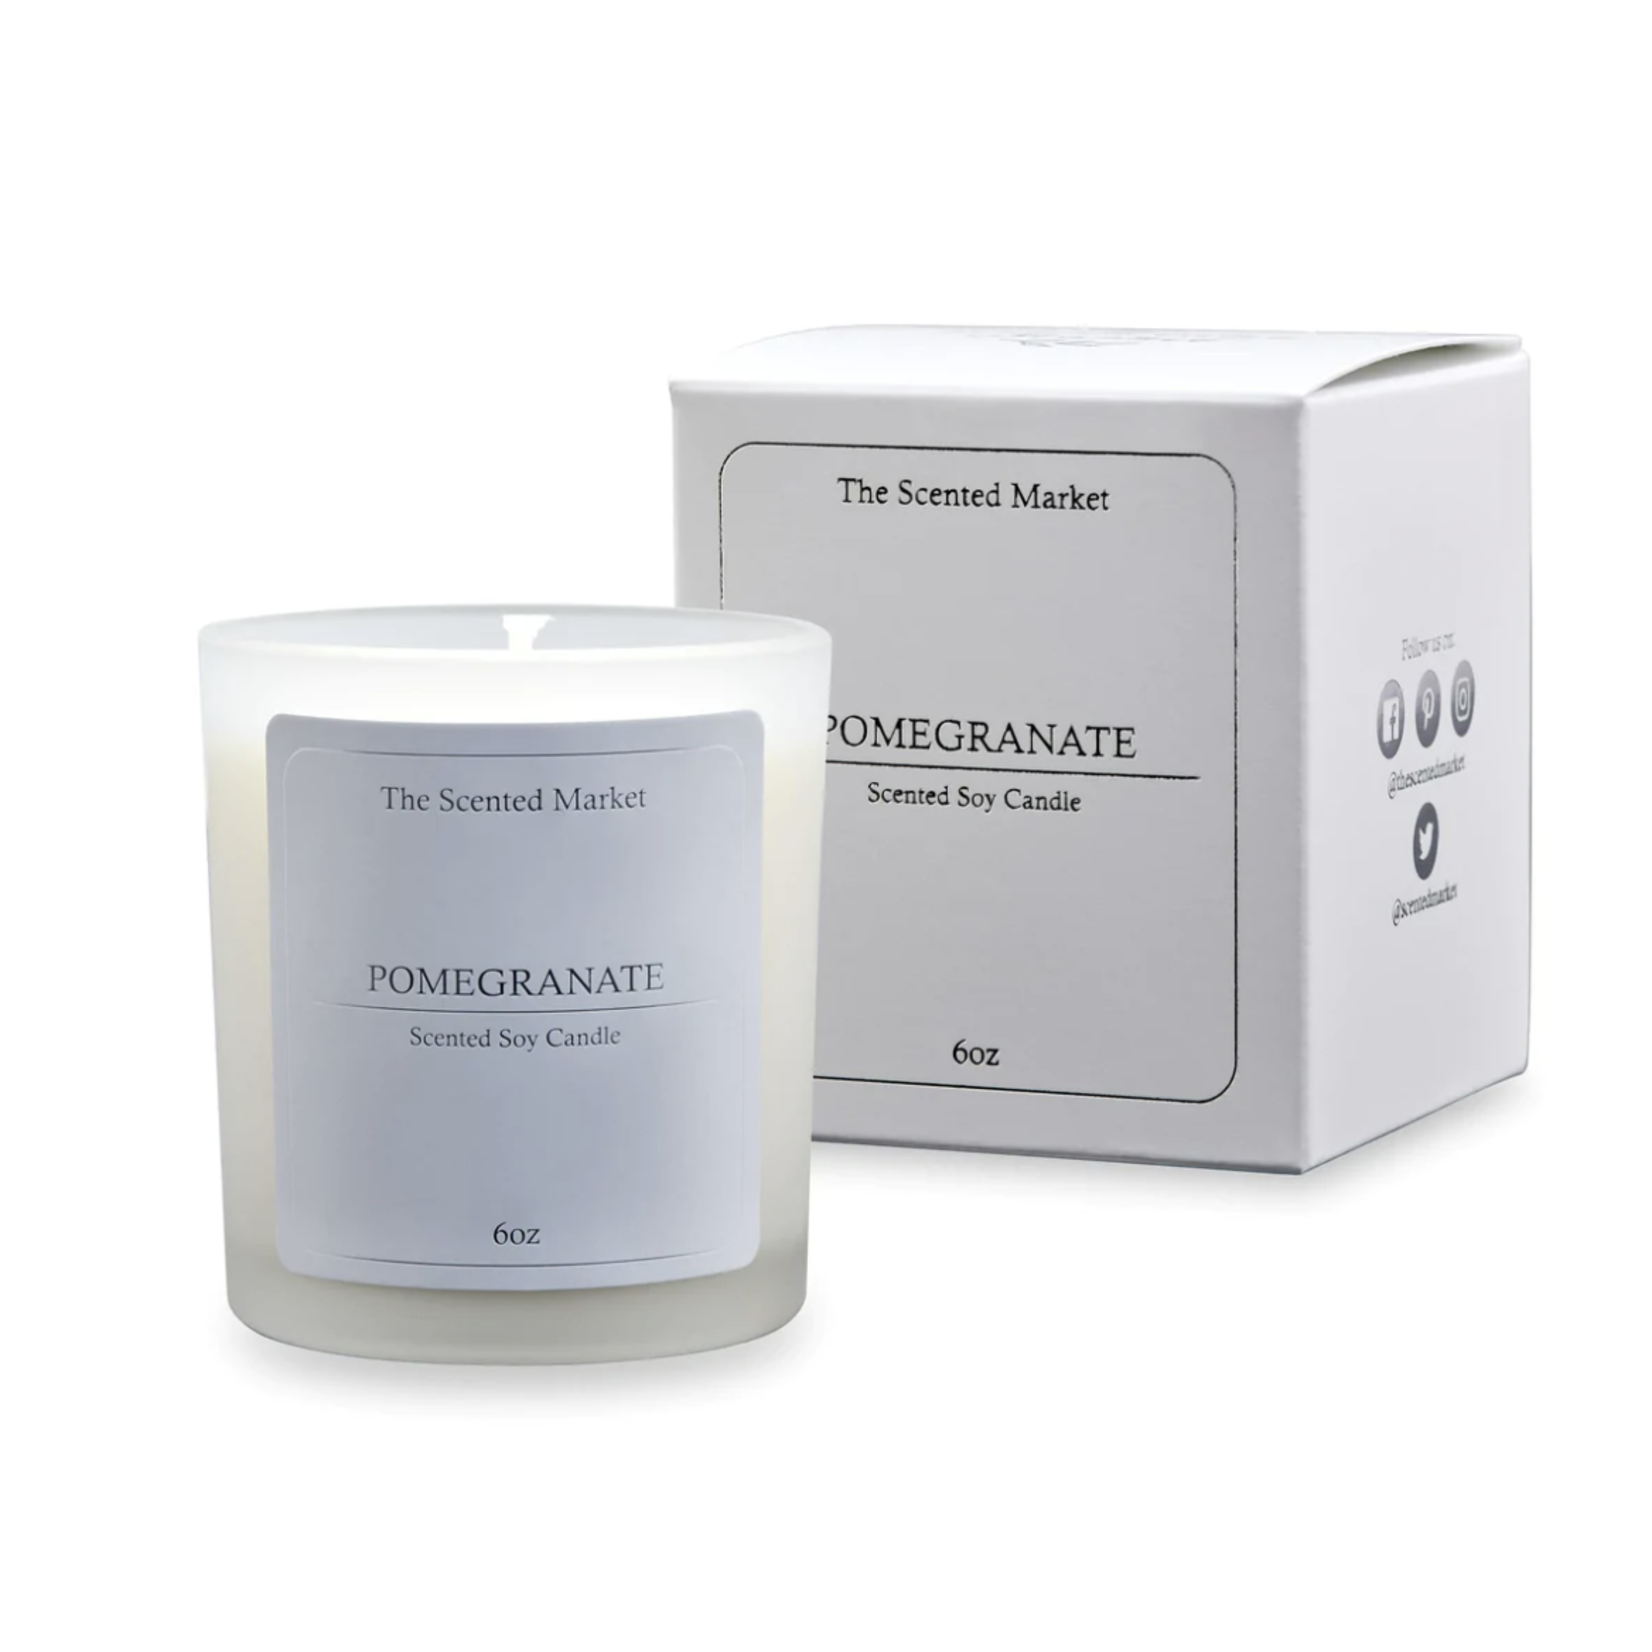 The Scented Market Pomegranate Soy Wax Candle 6 oz